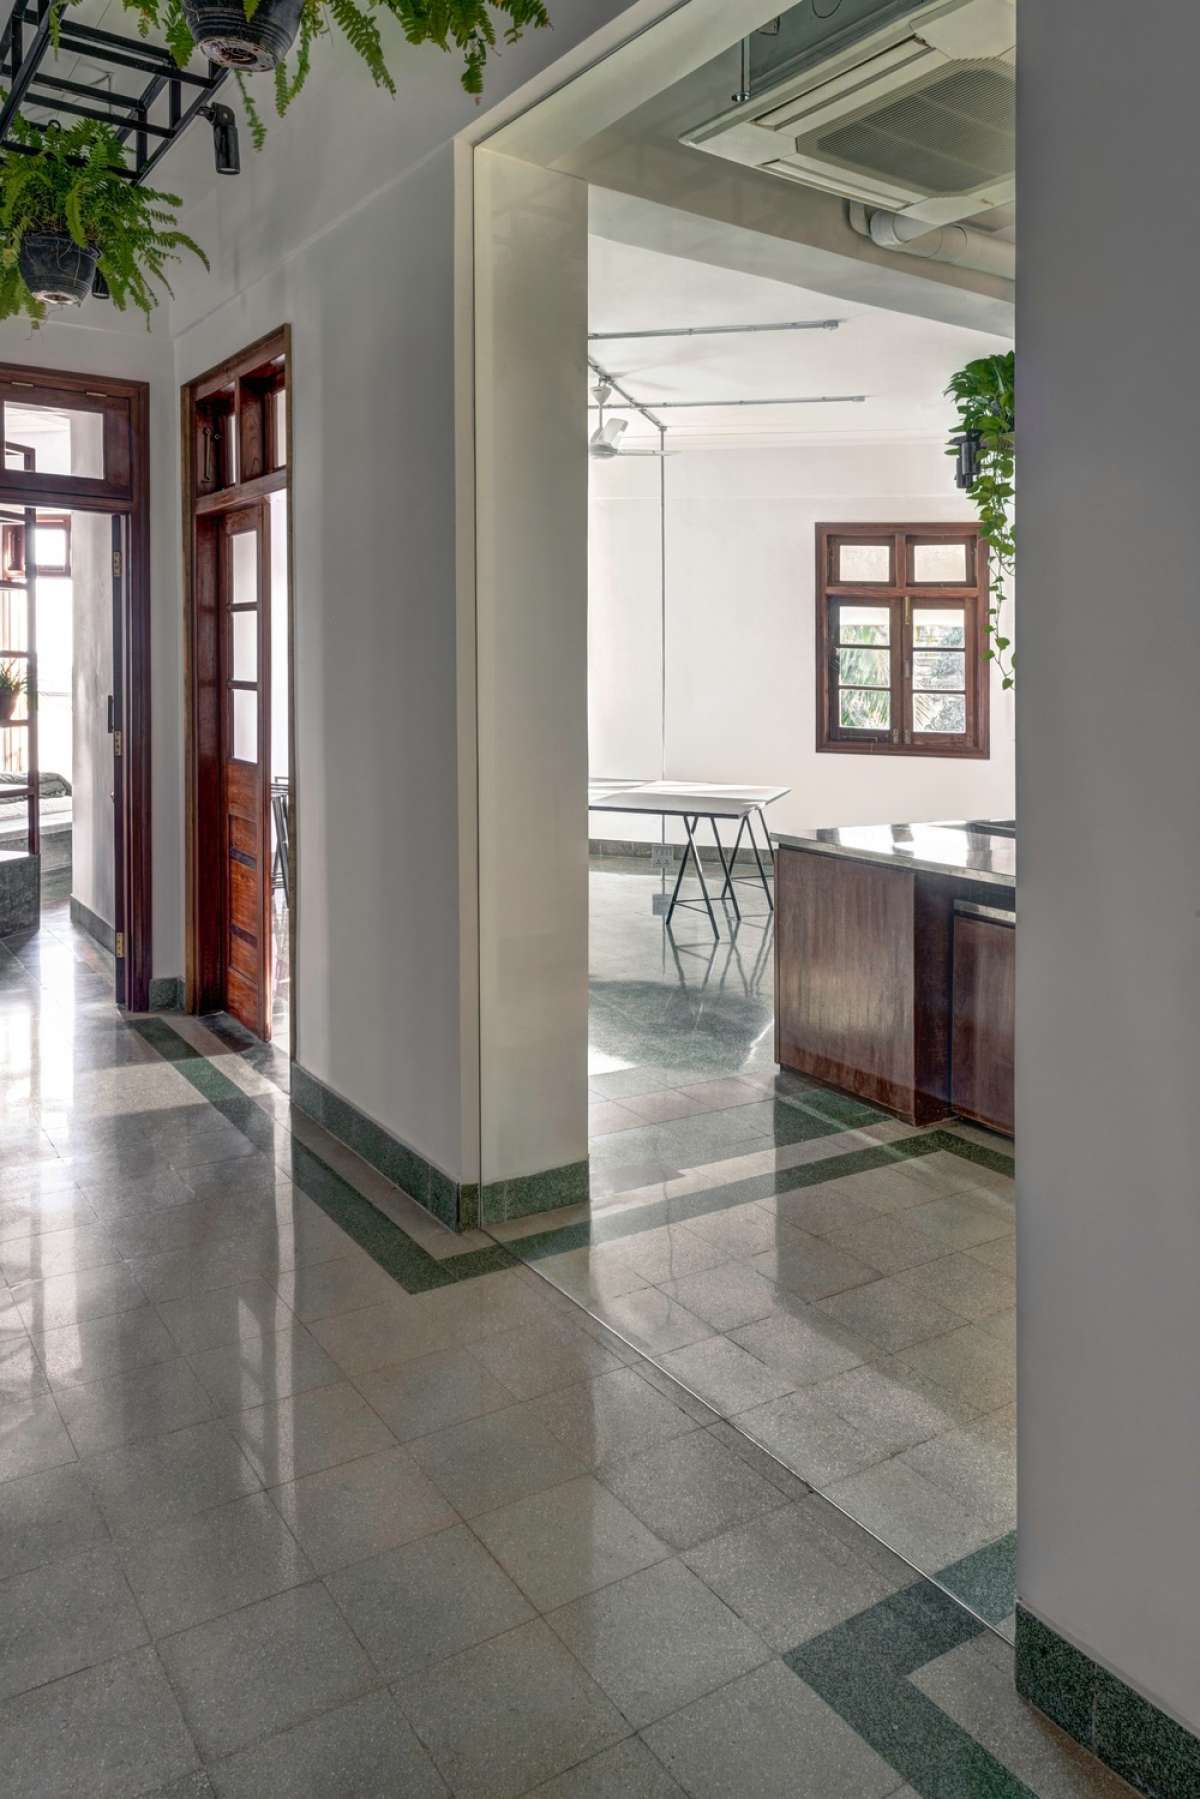 Existent terrazzo flooring guiding through space - the absence of wall vs presence of glass